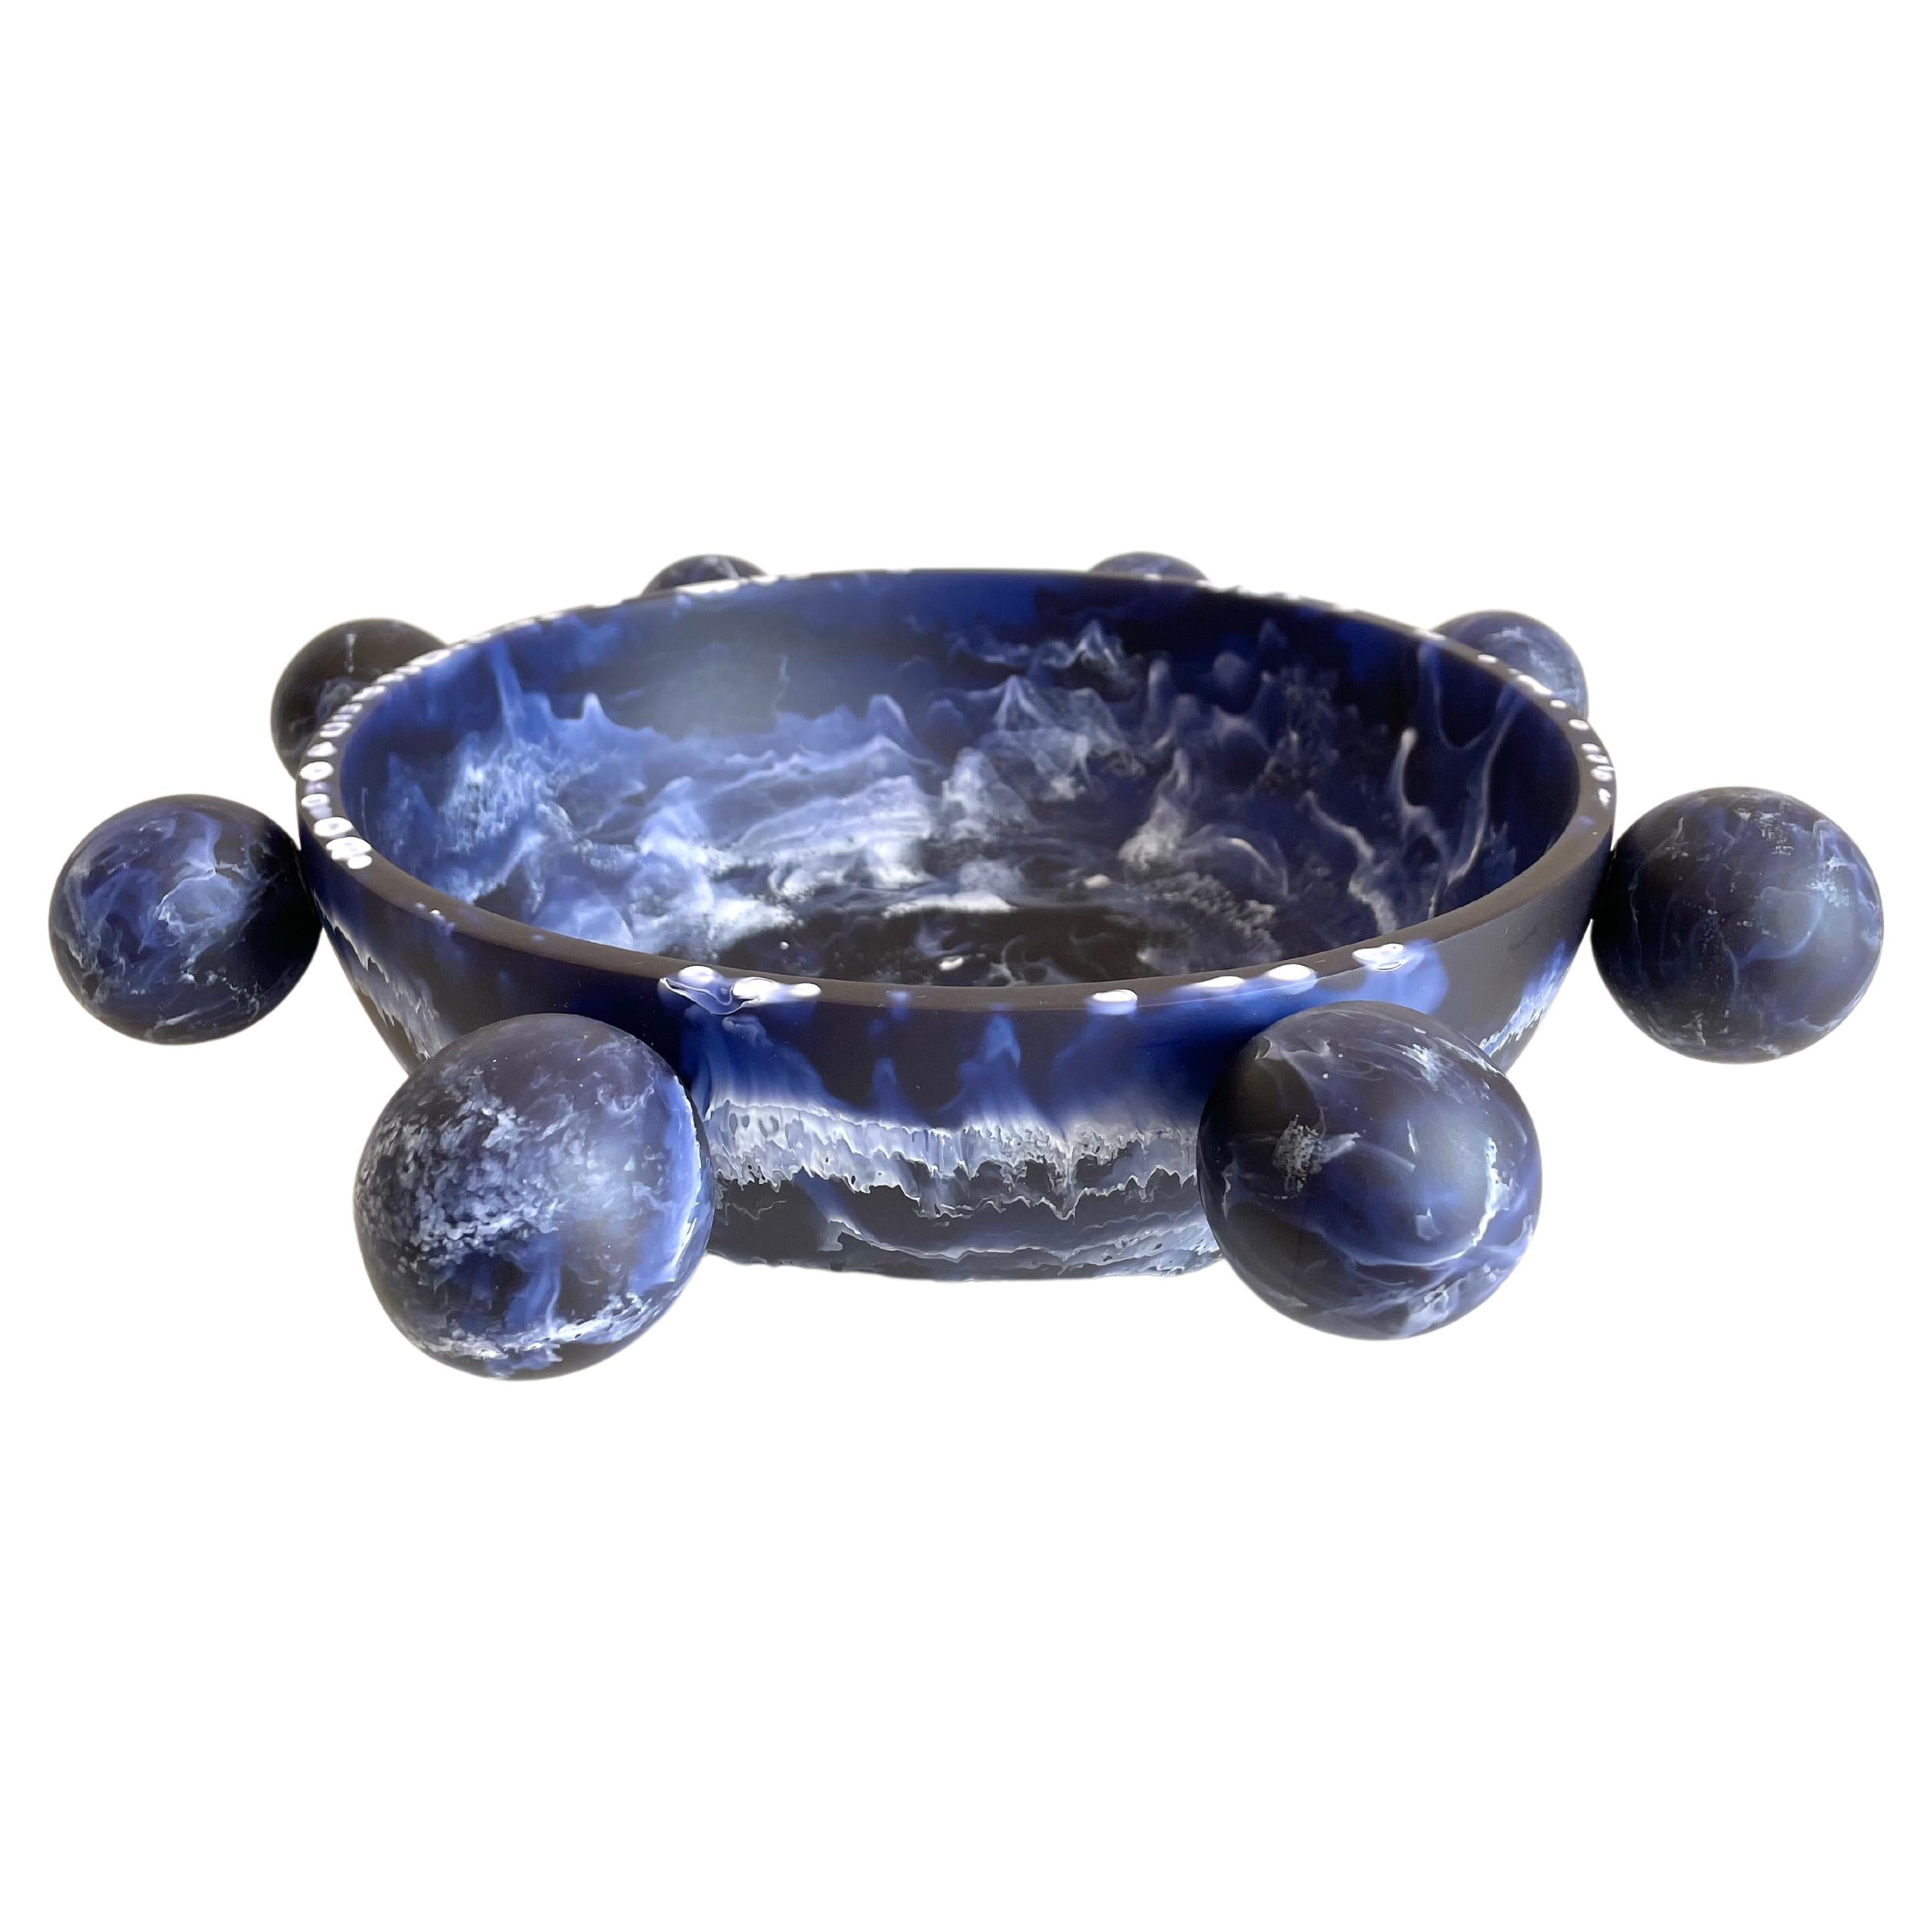 Bubble Bowl in Marbled Navy Blue Resin by Paola Valle For Sale